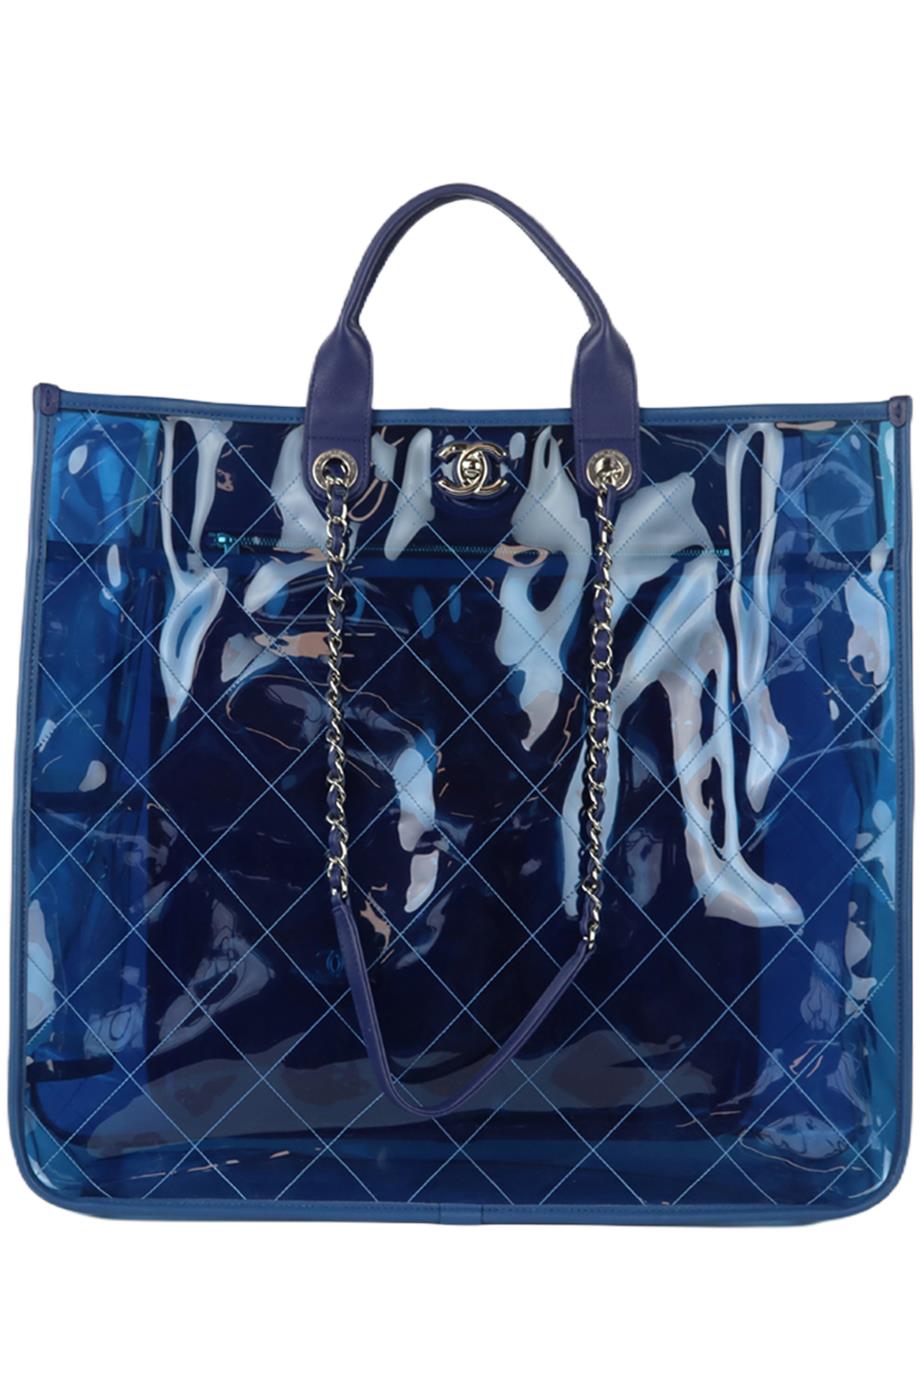 CHANEL 2018 COCO SPLASH QUILTED PERSPEX AND LEATHER TOTE BAG